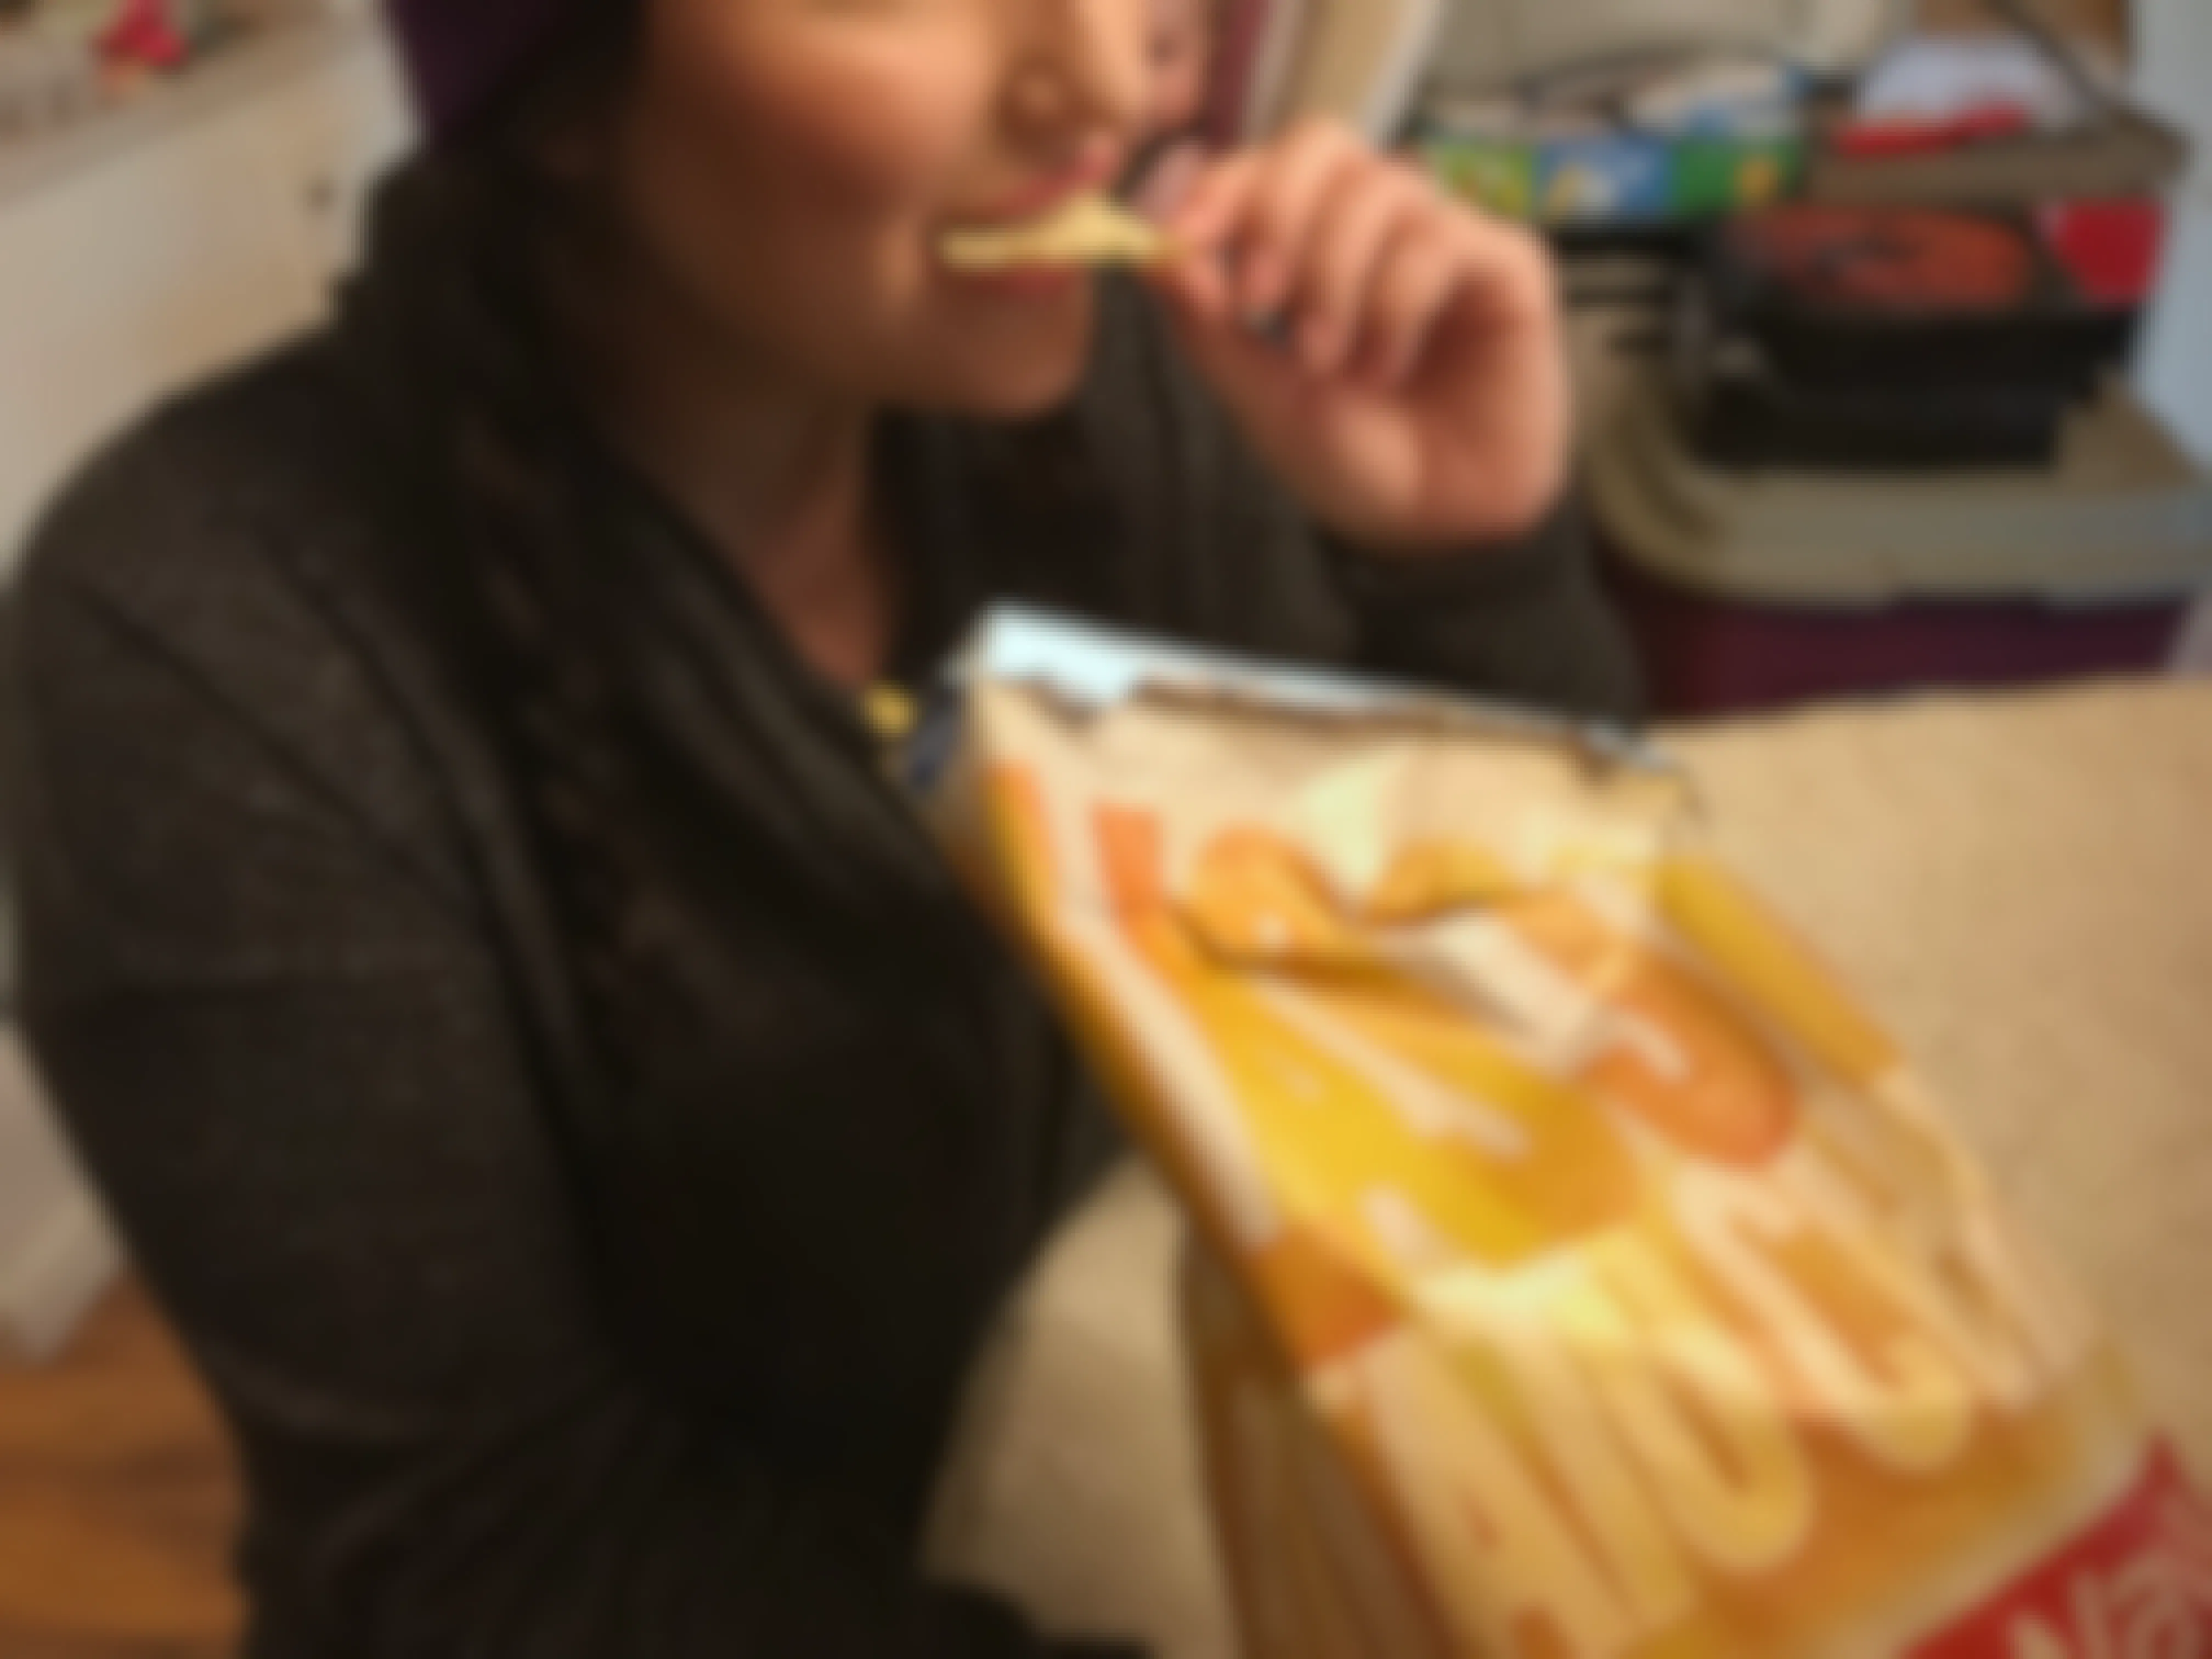 A person eating chips.